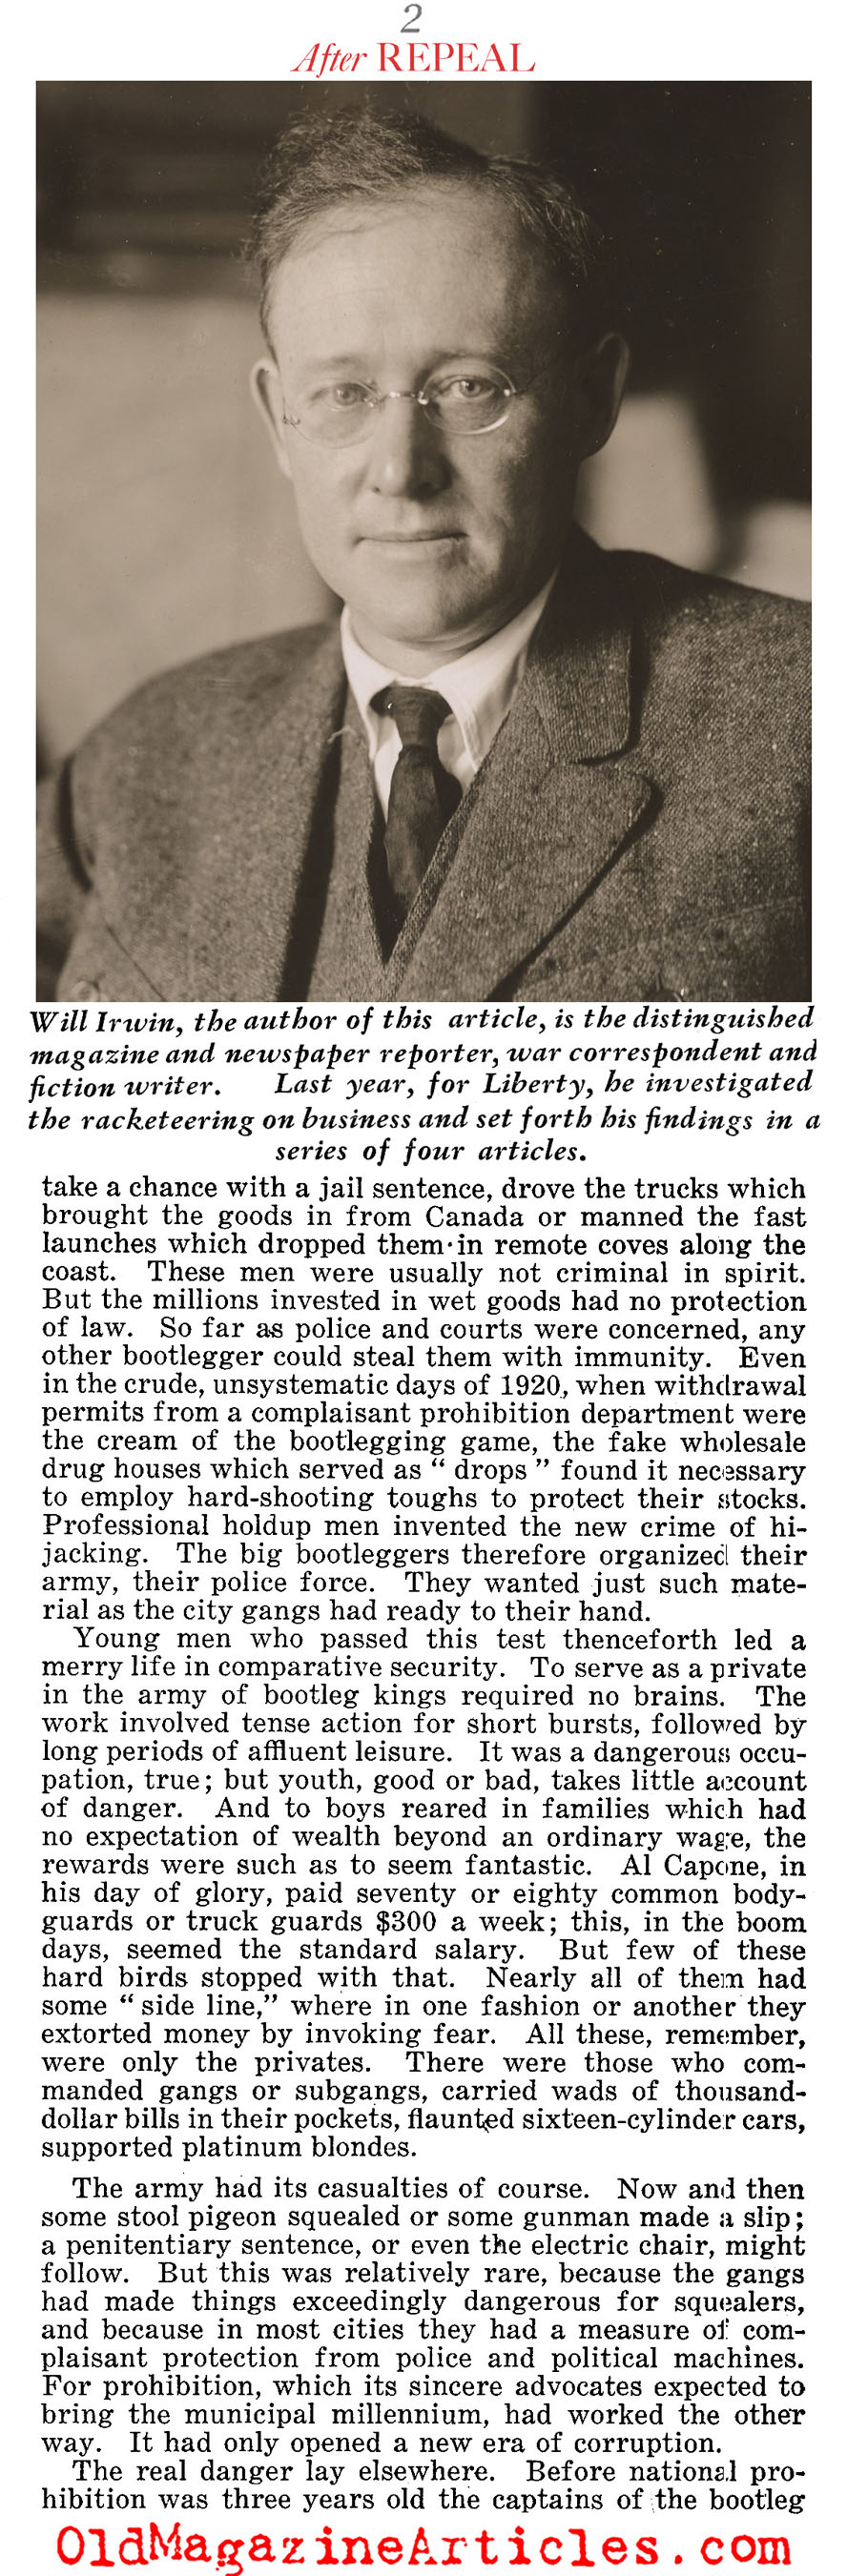 Post-Repeal Fears (Liberty Magazine, 1933)